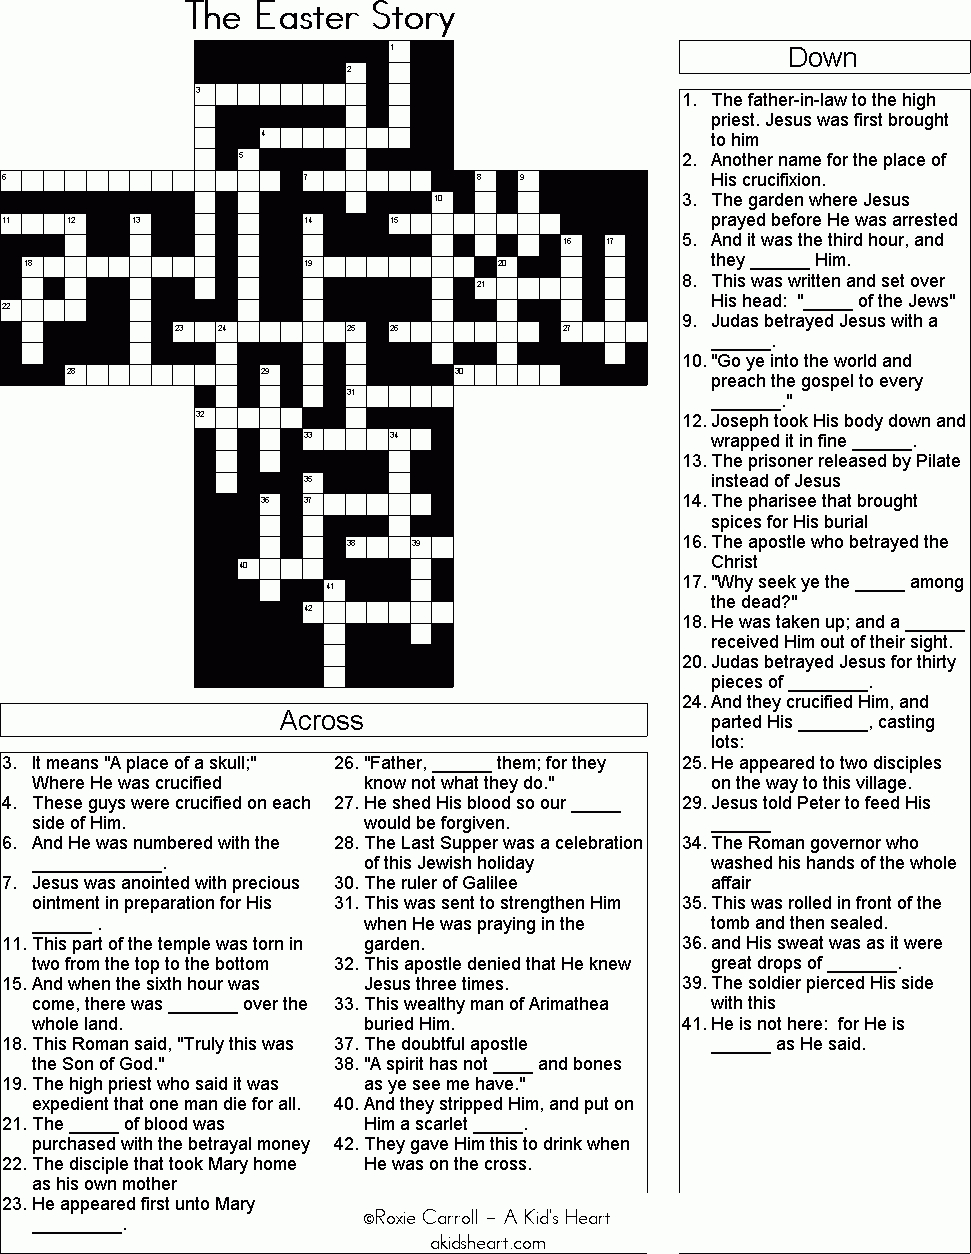 The Easter Story Crossword Puzzle | Bible Crosswords/word Search - Printable Bible Puzzles For Adults